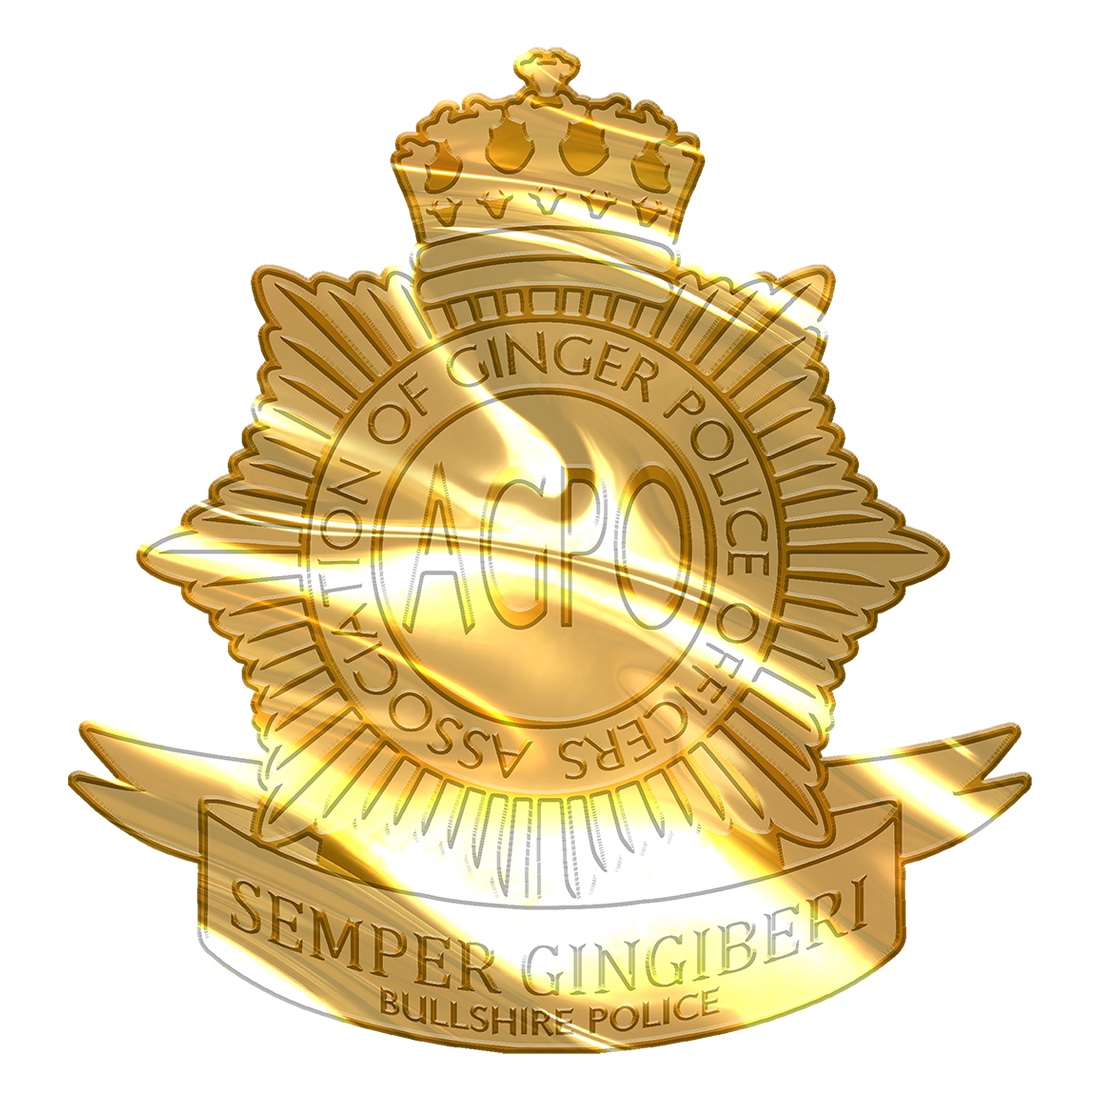 Real Gold Plated Bronze 'Association of Ginger Police Officers' Pin Badge